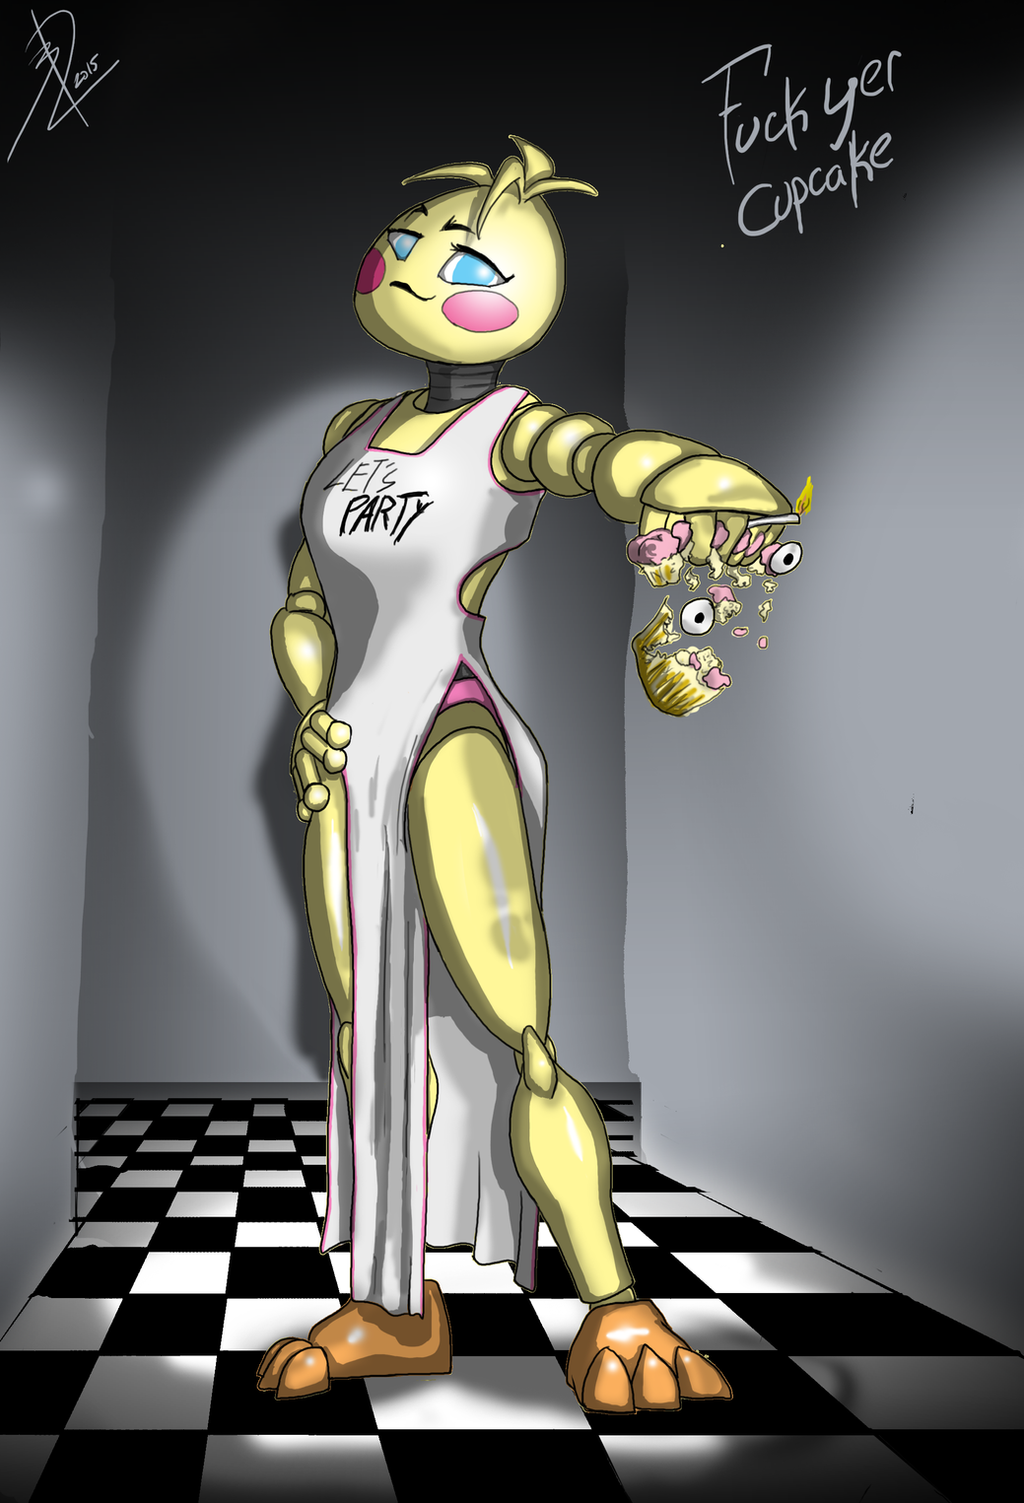 Extra Thicc Toy Chica.